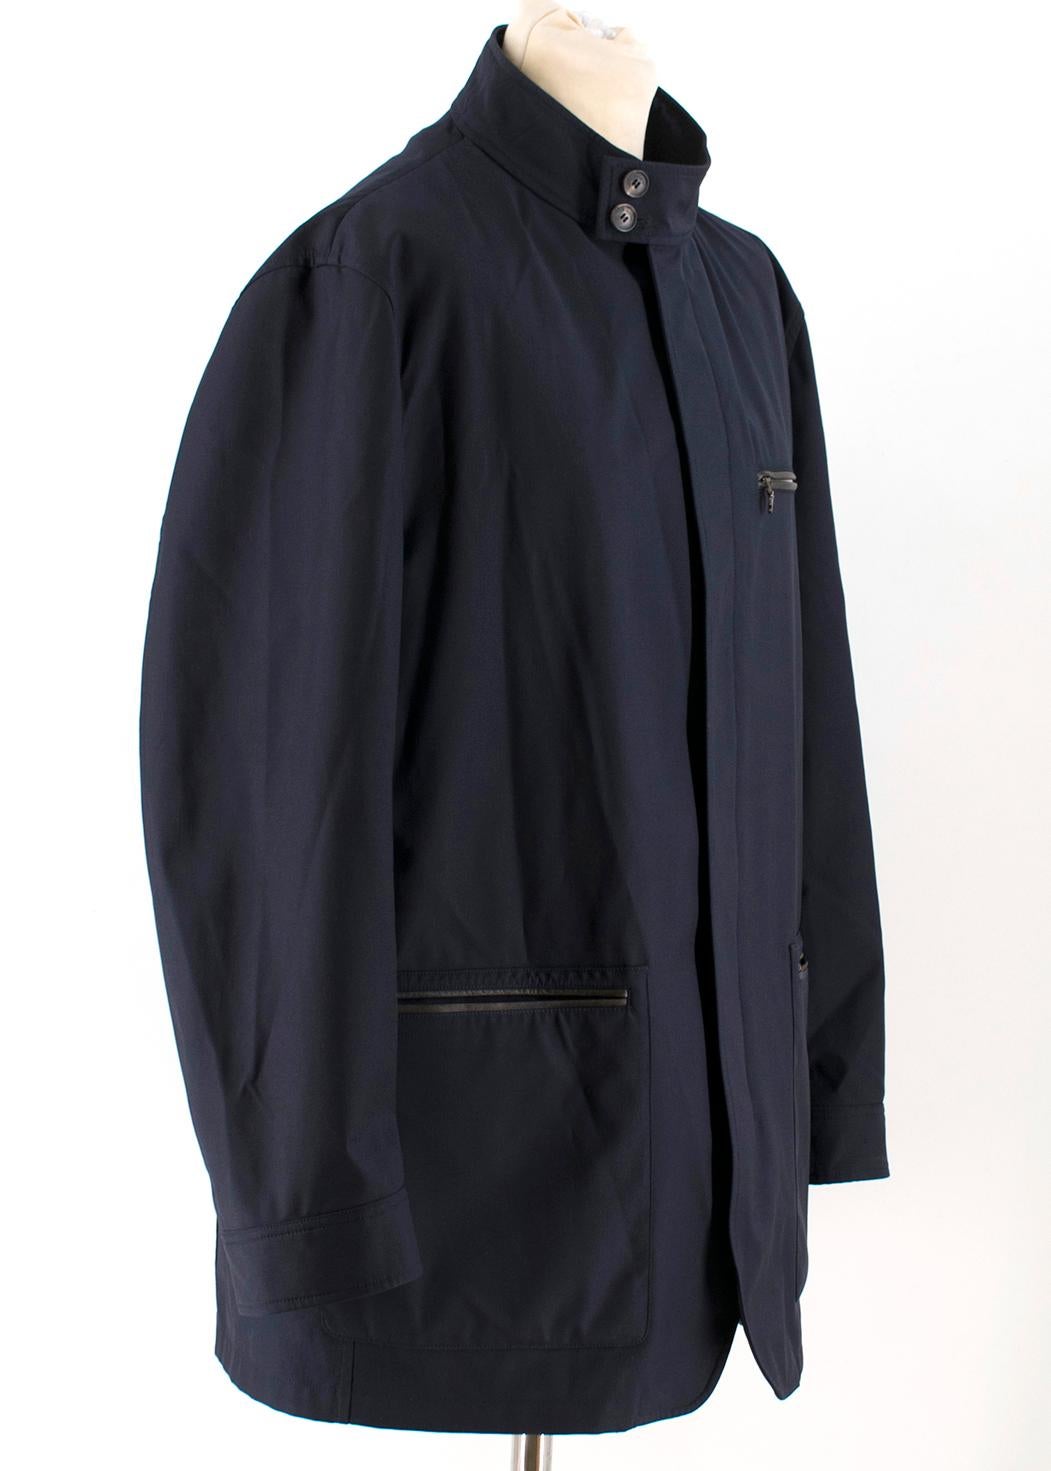 Salvatore Ferragamo Navy Padded Trench Coat  

- Navy medium-length coat made in technical fabric
- The coat has removable padded vest with zip fastening
- Zip closure
- Two button fastening of collar stand
- Cotton Collar insert inside
- Two large